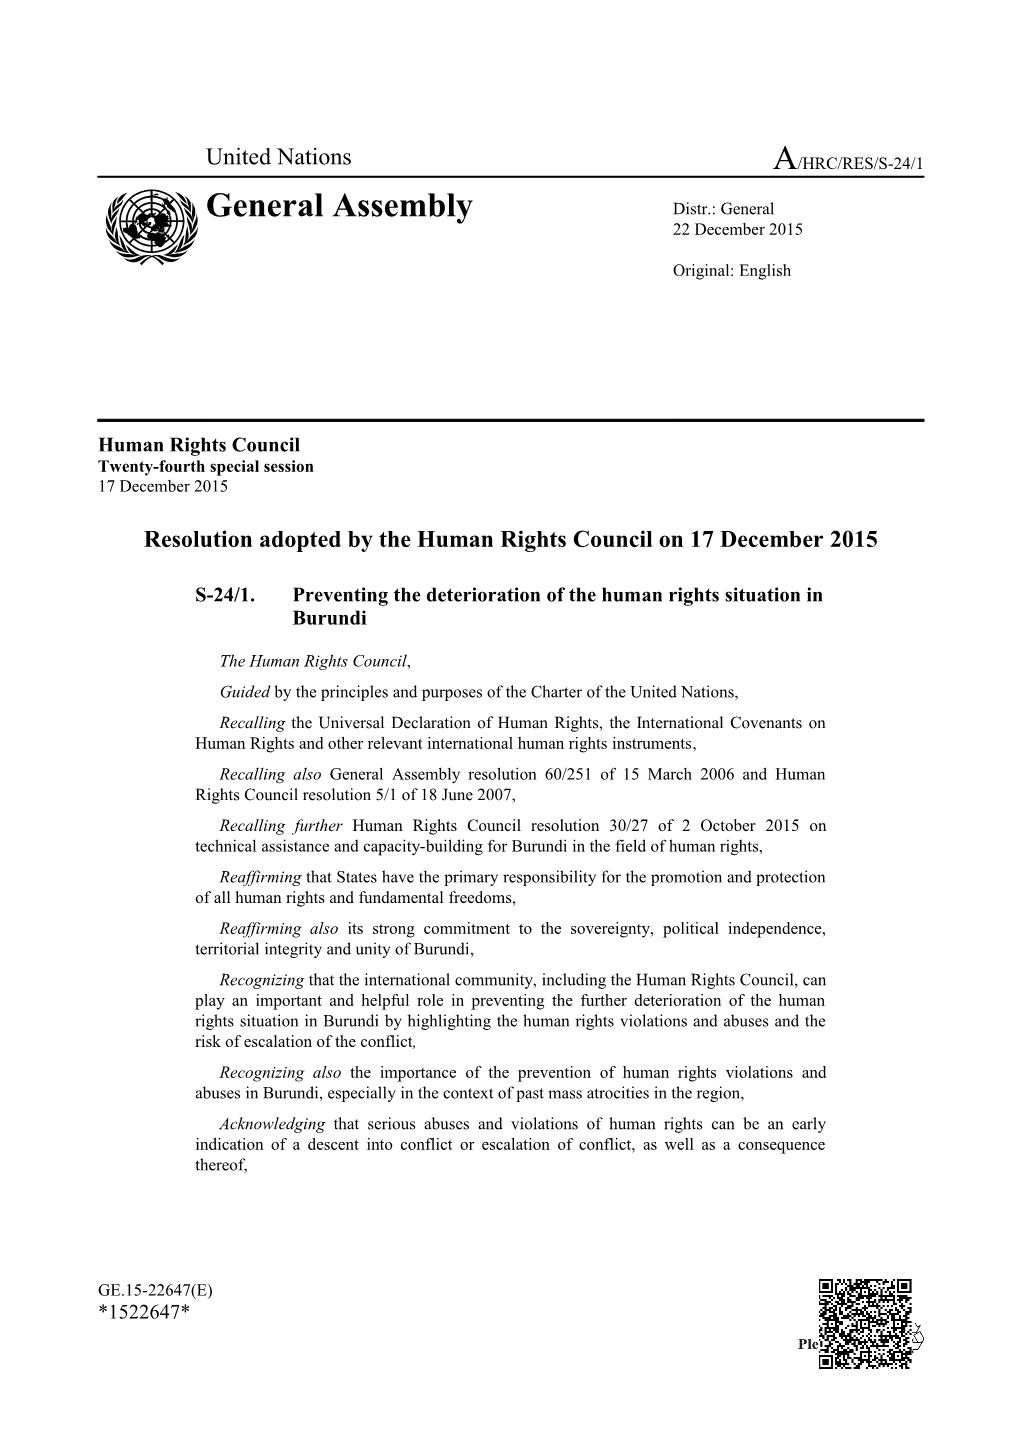 Human Rights Council Resolution S-24/1 Adopted on 17 December 2015 in English